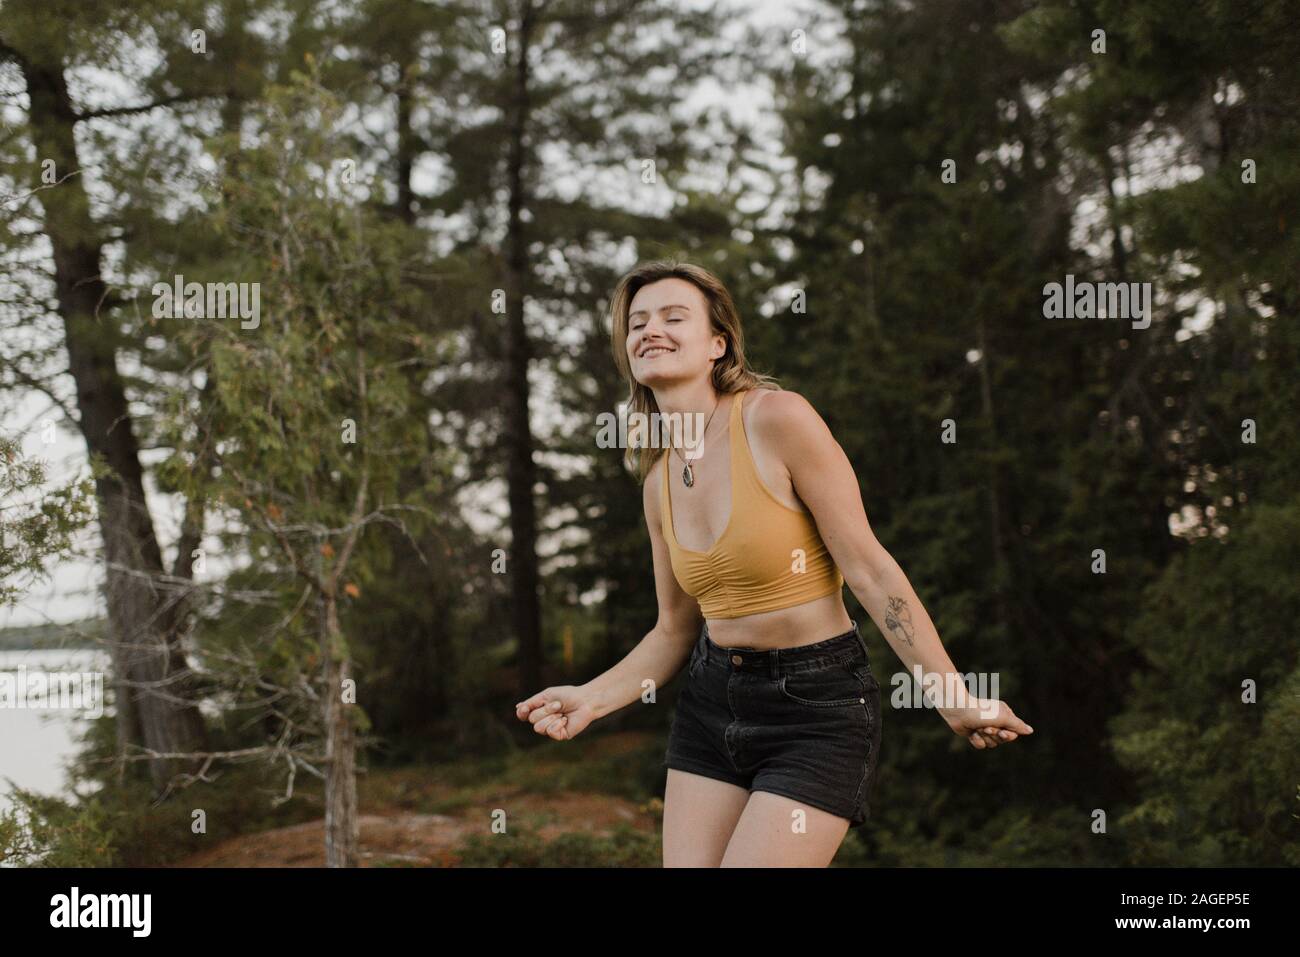 Woman dancing with eyes closed in forest Stock Photo